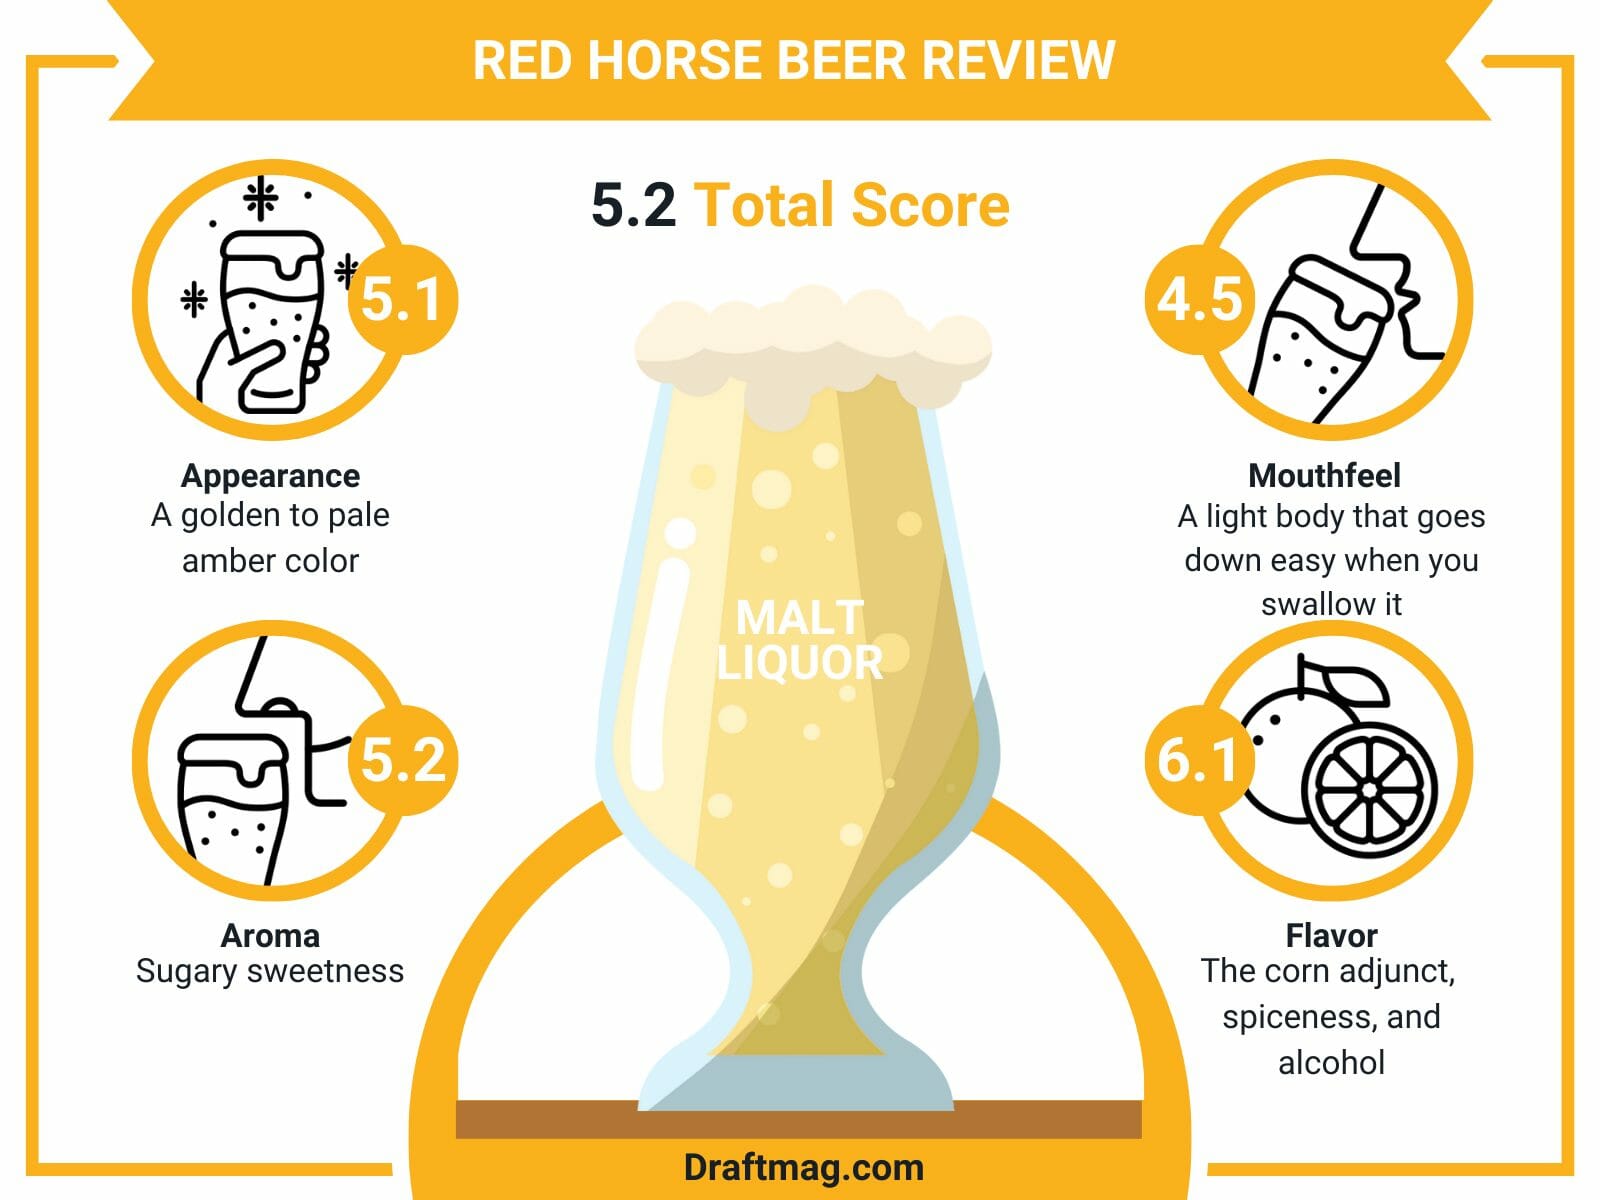 Red horse beer review infographic